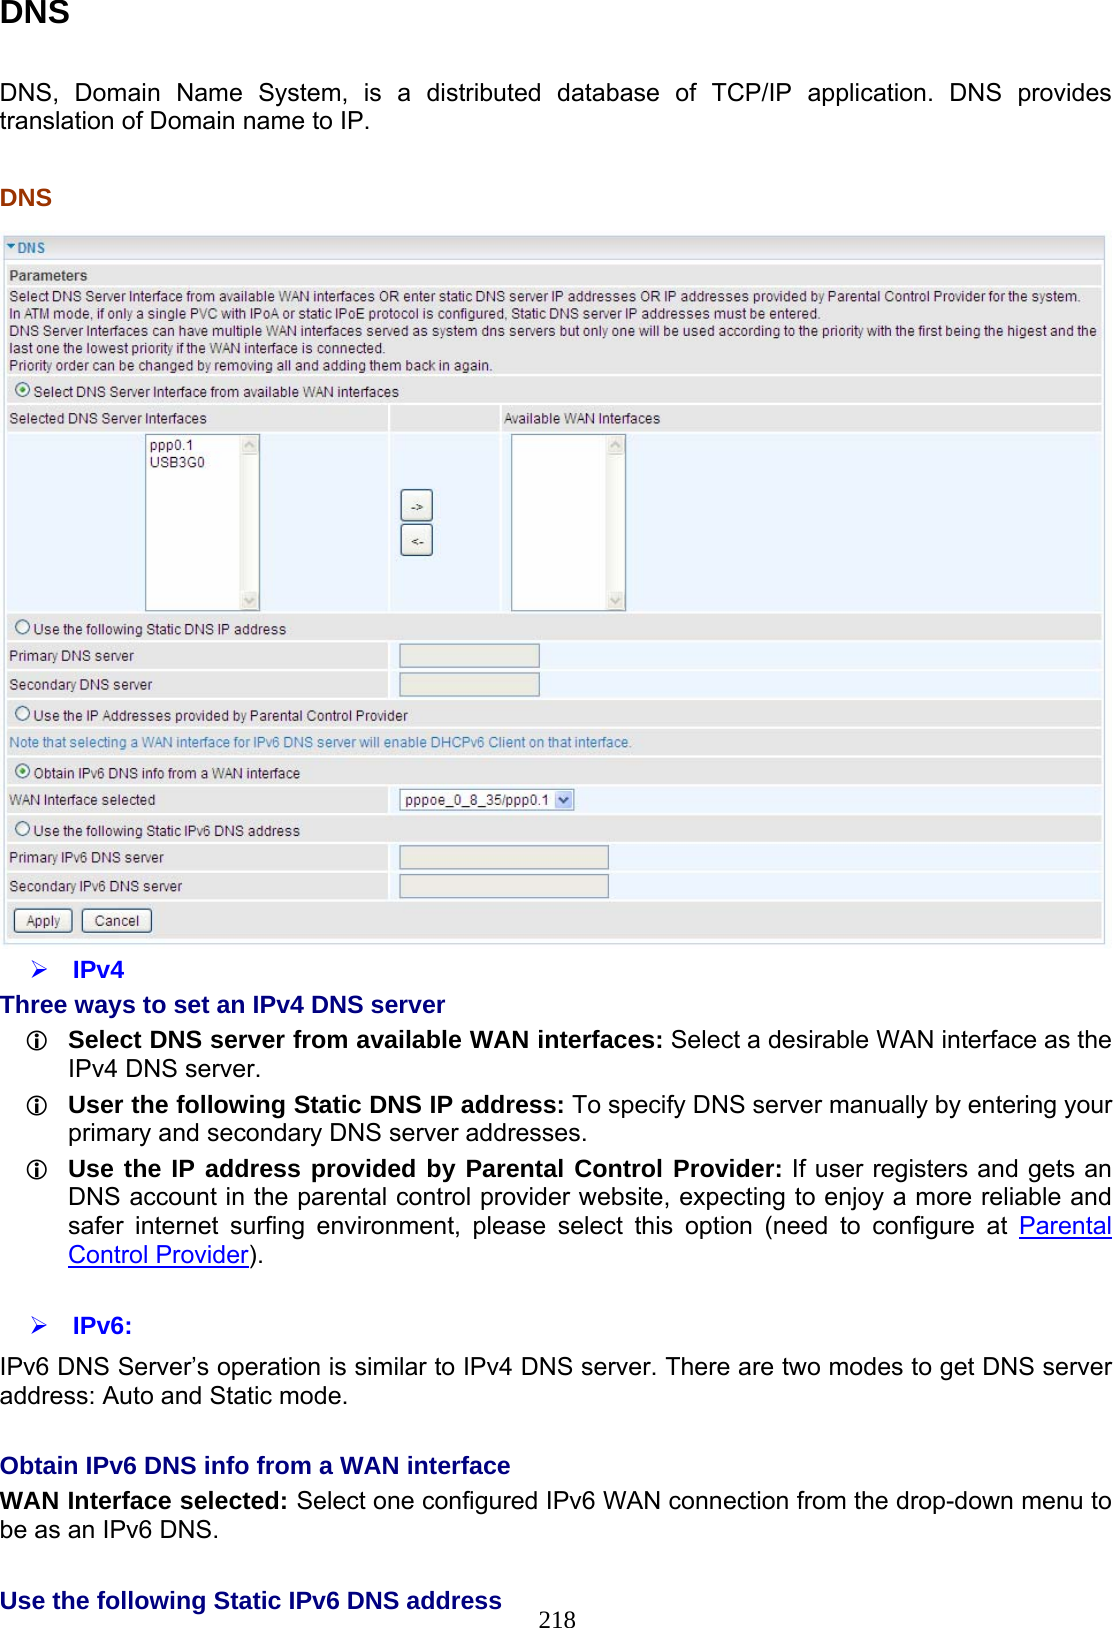 218 DNS  DNS, Domain Name System, is a distributed database of TCP/IP application. DNS provides translation of Domain name to IP.   DNS    IPv4 Three ways to set an IPv4 DNS server  Select DNS server from available WAN interfaces: Select a desirable WAN interface as the IPv4 DNS server.  User the following Static DNS IP address: To specify DNS server manually by entering your primary and secondary DNS server addresses.  Use the IP address provided by Parental Control Provider: If user registers and gets an DNS account in the parental control provider website, expecting to enjoy a more reliable and safer internet surfing environment, please select this option (need to configure at Parental Control Provider).   IPv6: IPv6 DNS Server’s operation is similar to IPv4 DNS server. There are two modes to get DNS server address: Auto and Static mode.  Obtain IPv6 DNS info from a WAN interface WAN Interface selected: Select one configured IPv6 WAN connection from the drop-down menu to be as an IPv6 DNS.   Use the following Static IPv6 DNS address 